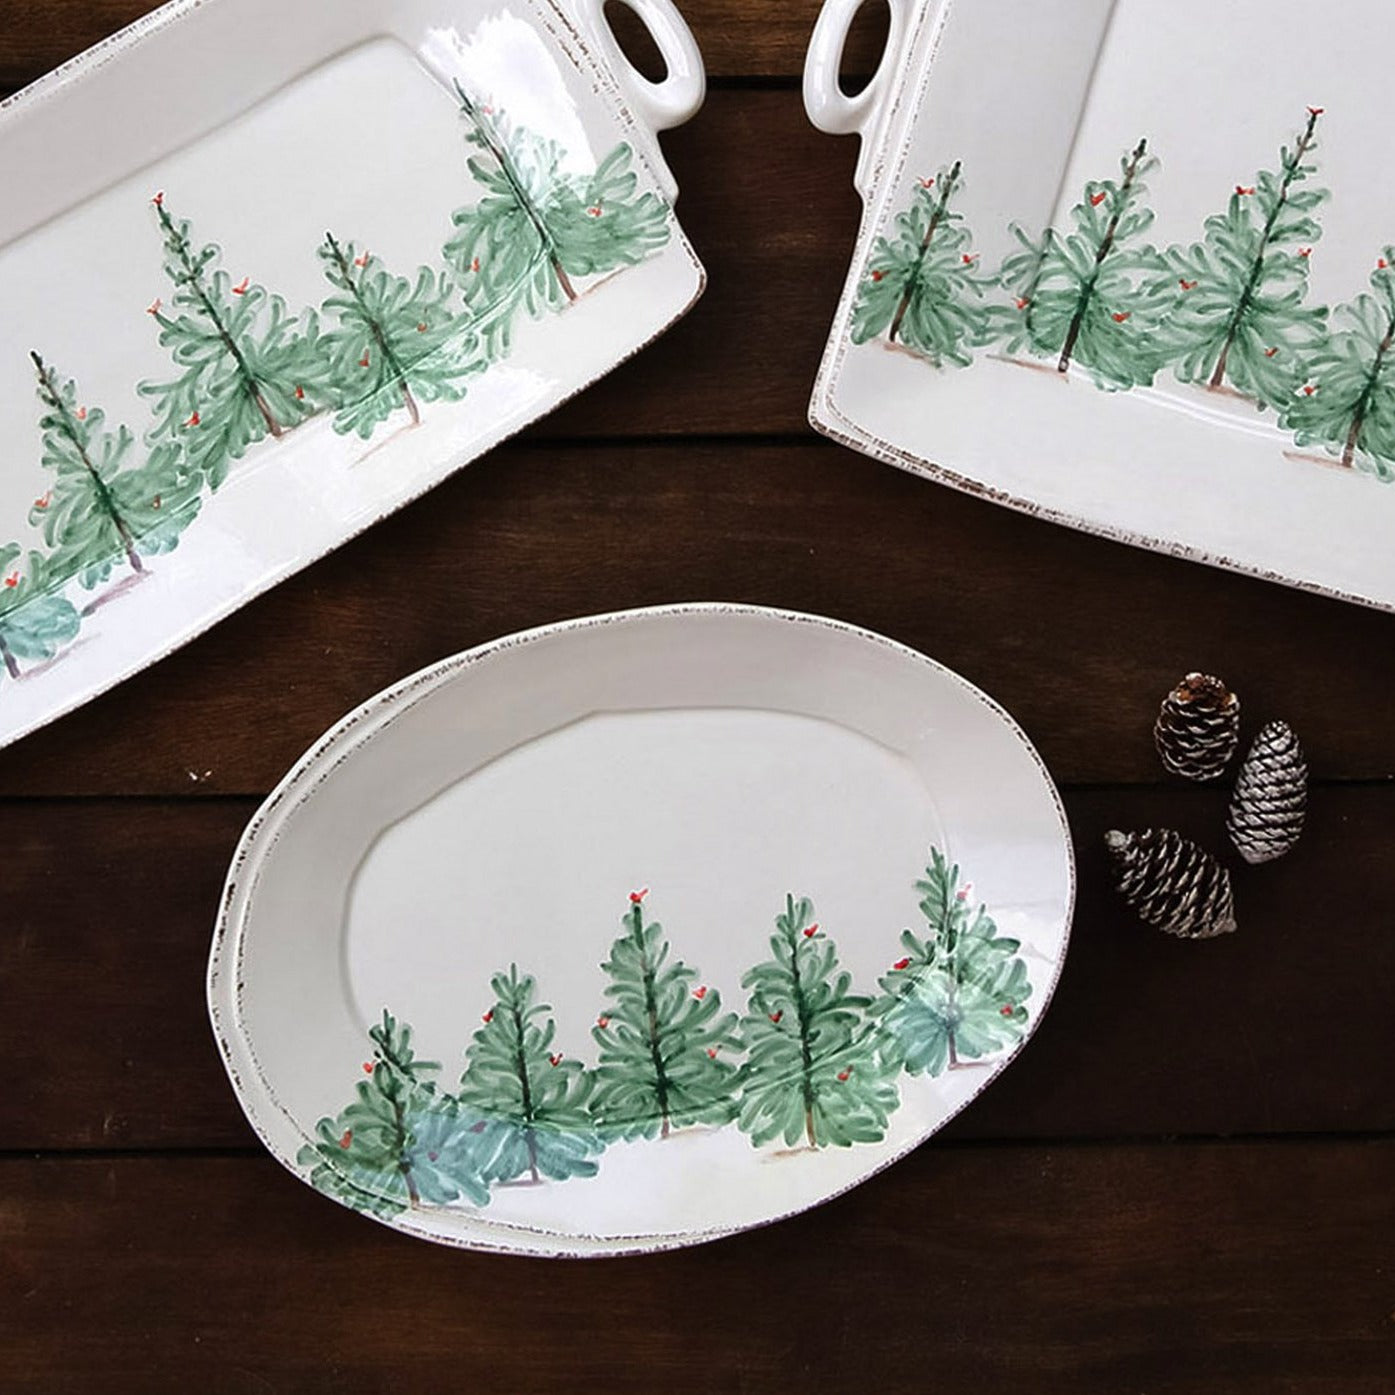 holiday platters and pinecones arranged on wooden tabletop.